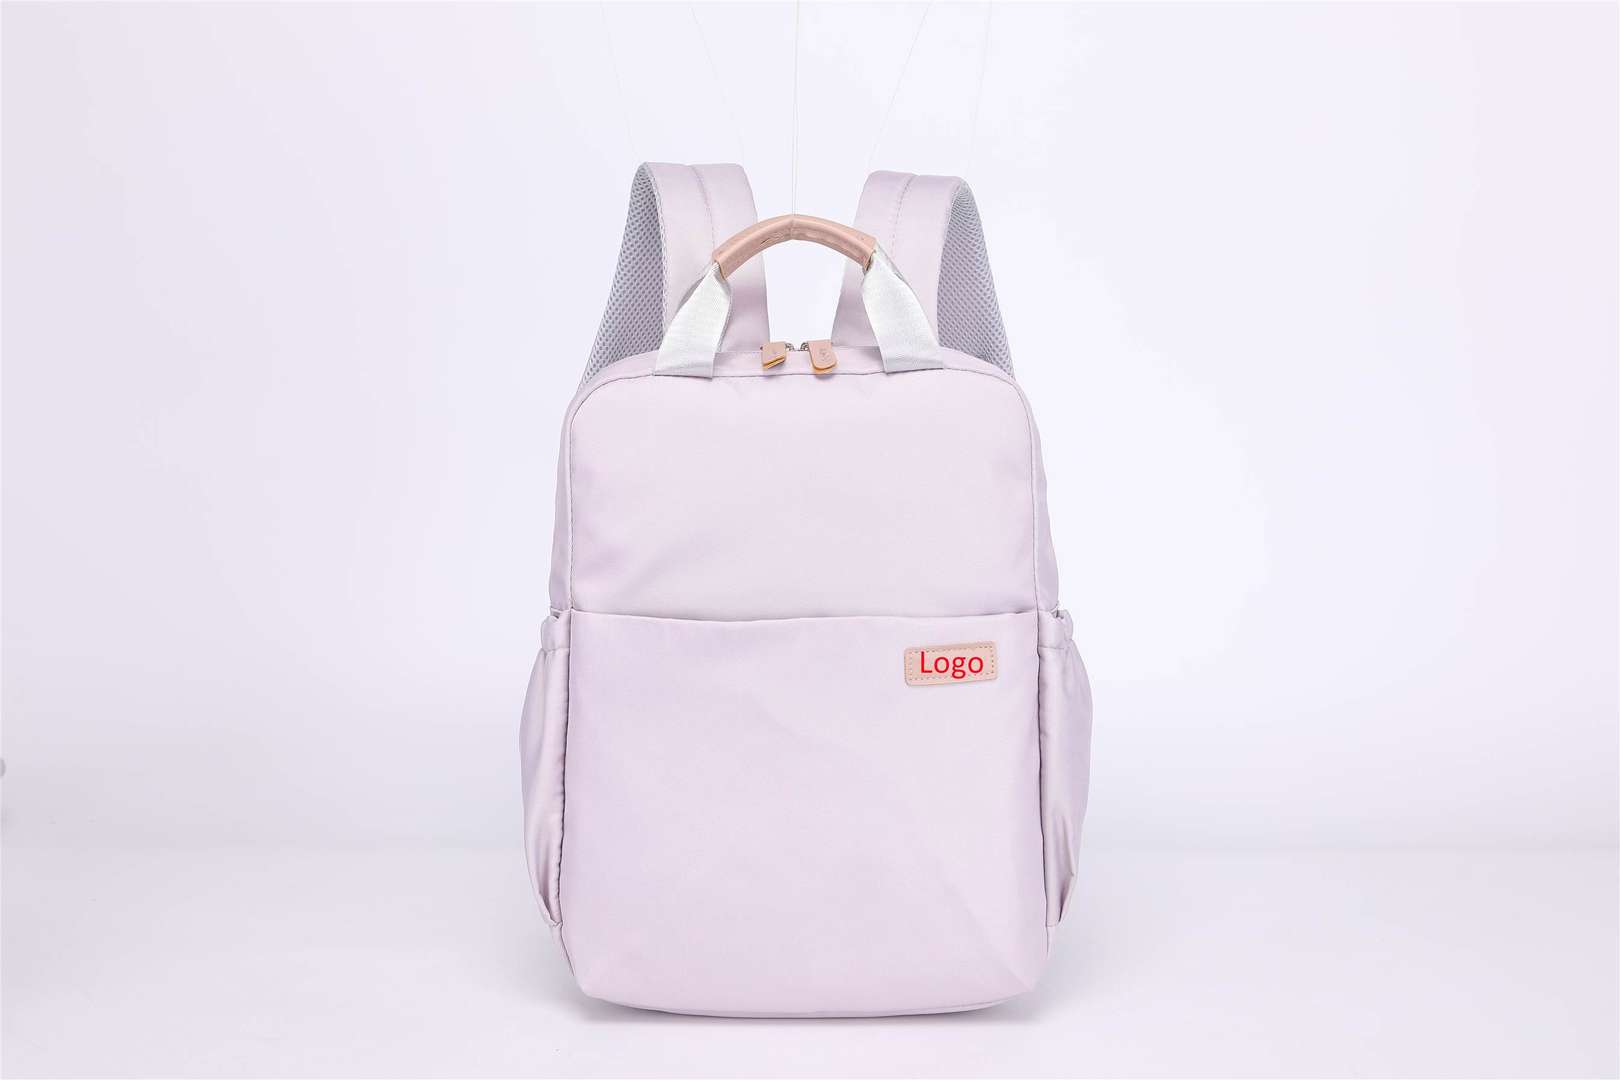 Swagger Laptop Backpack